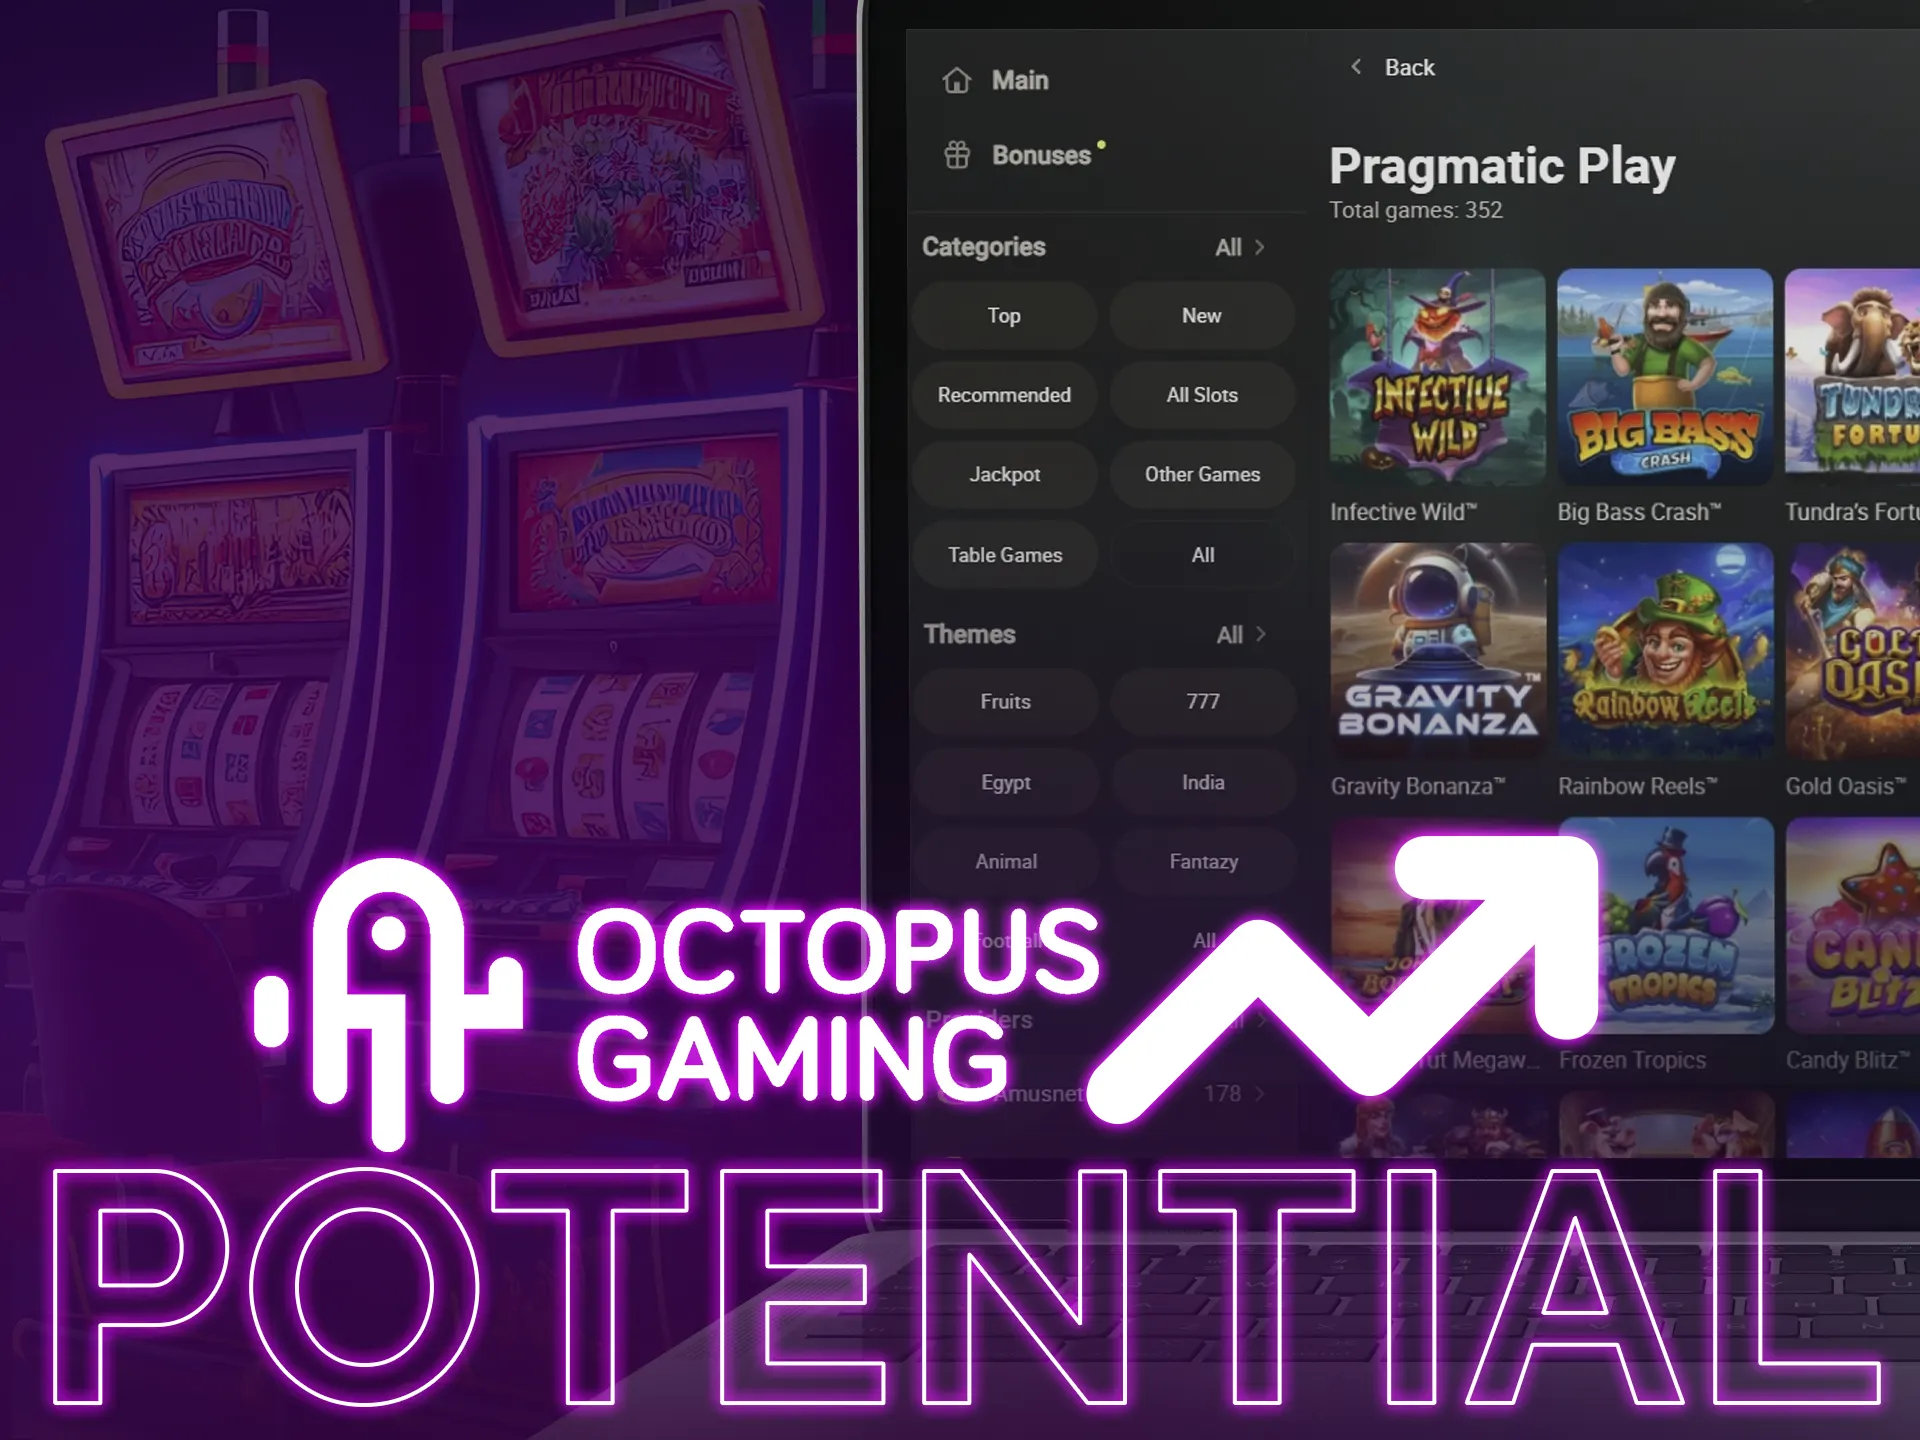 Octopus Gaming slots giving you a high potential of winnings.